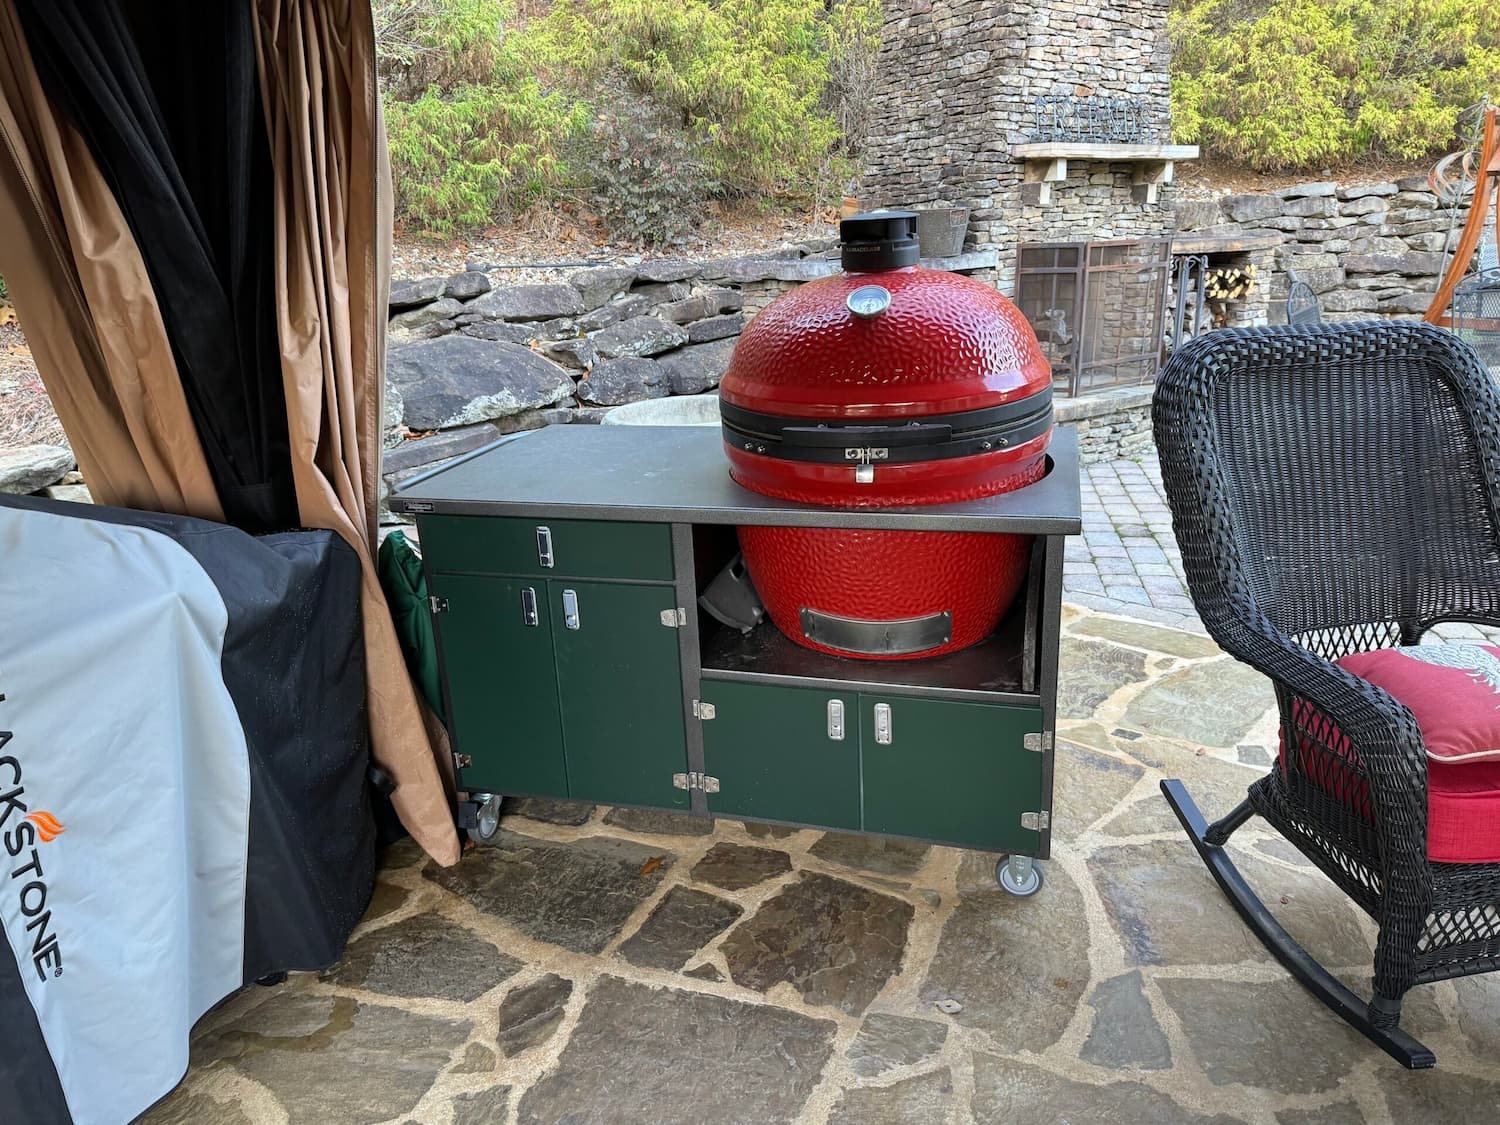 Red ceramic grill on outdoor patio setup.